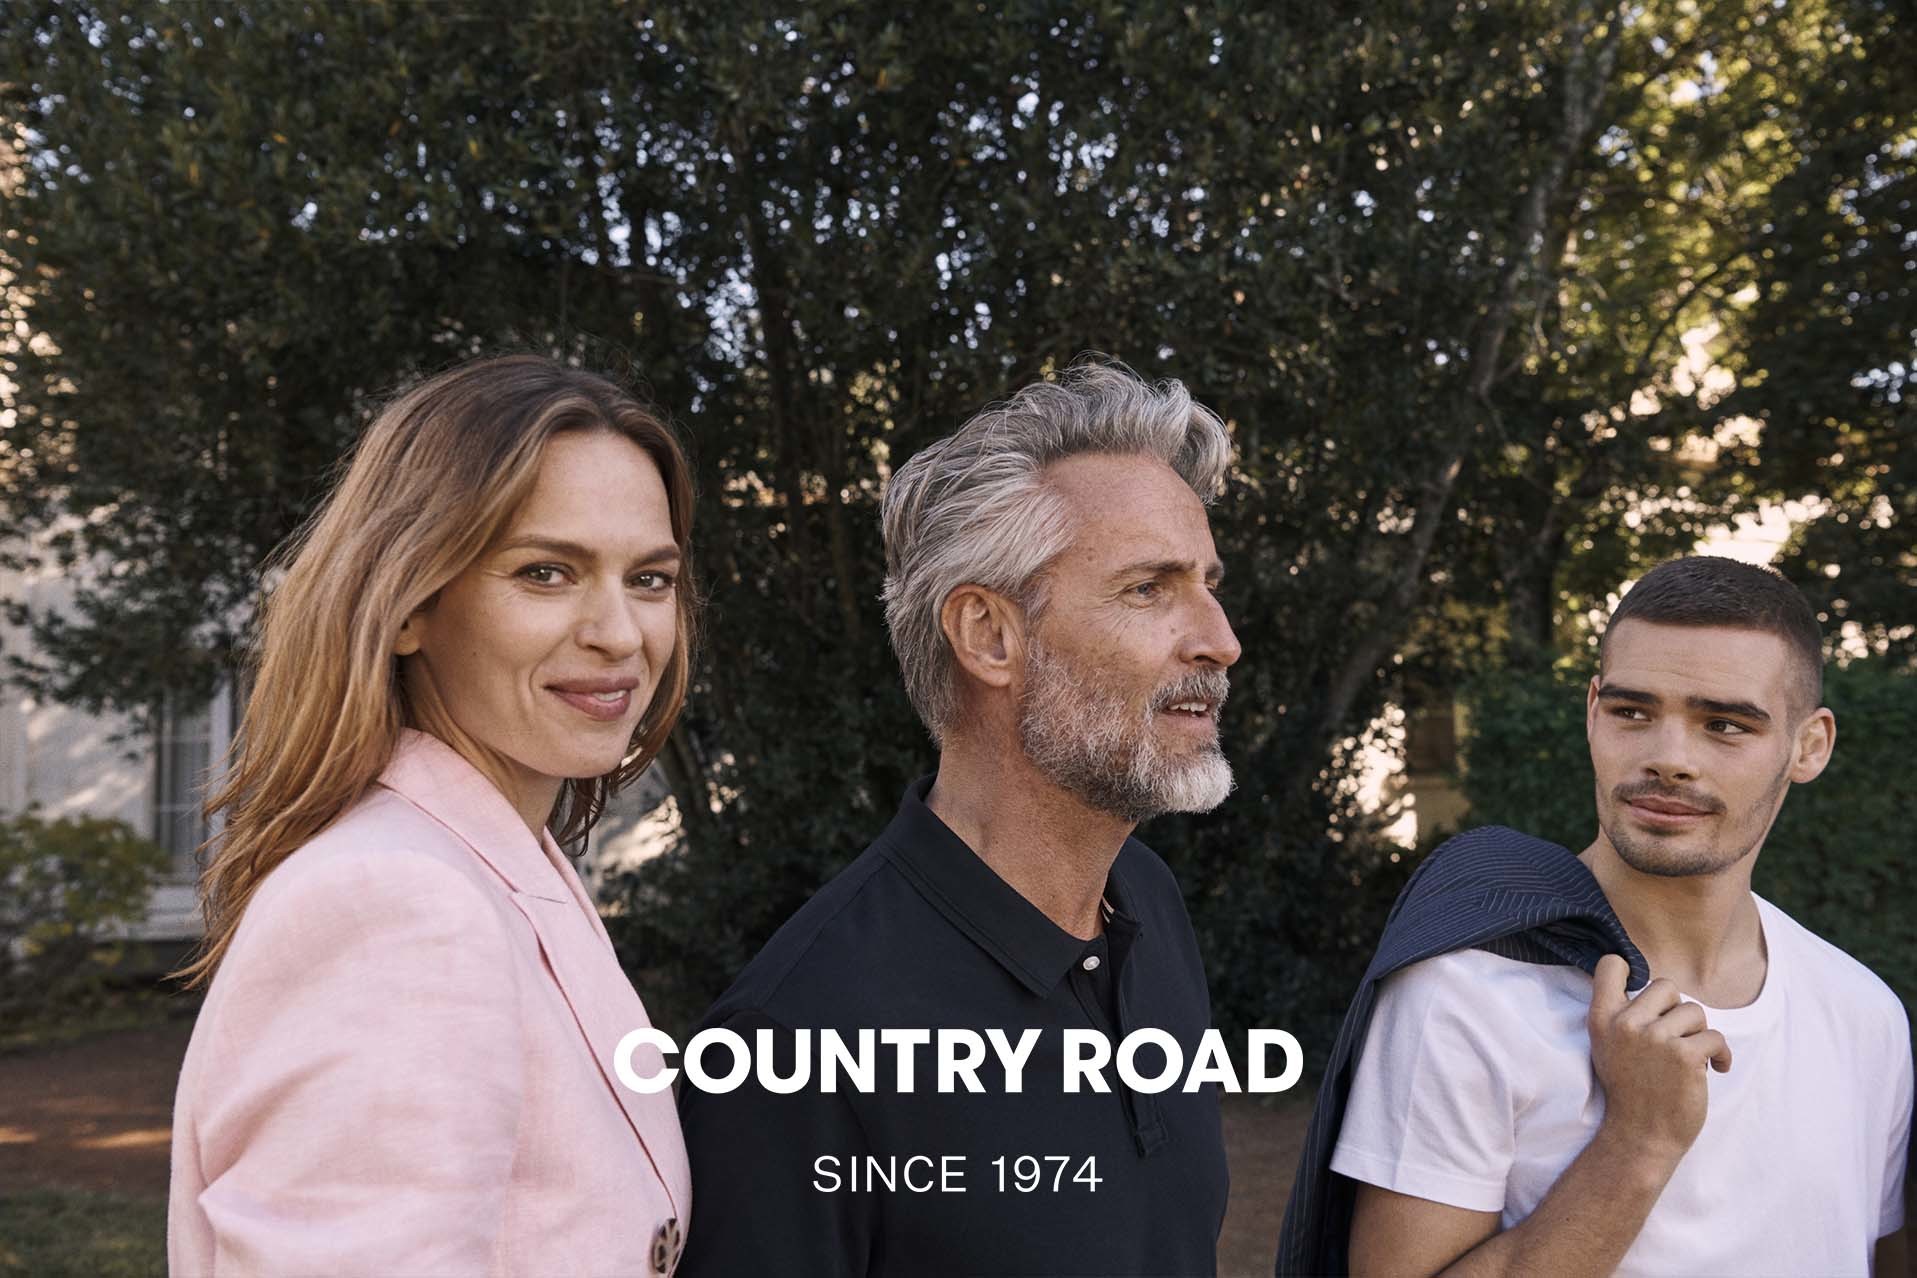 SPRING 19 - COUNTRY ROAD